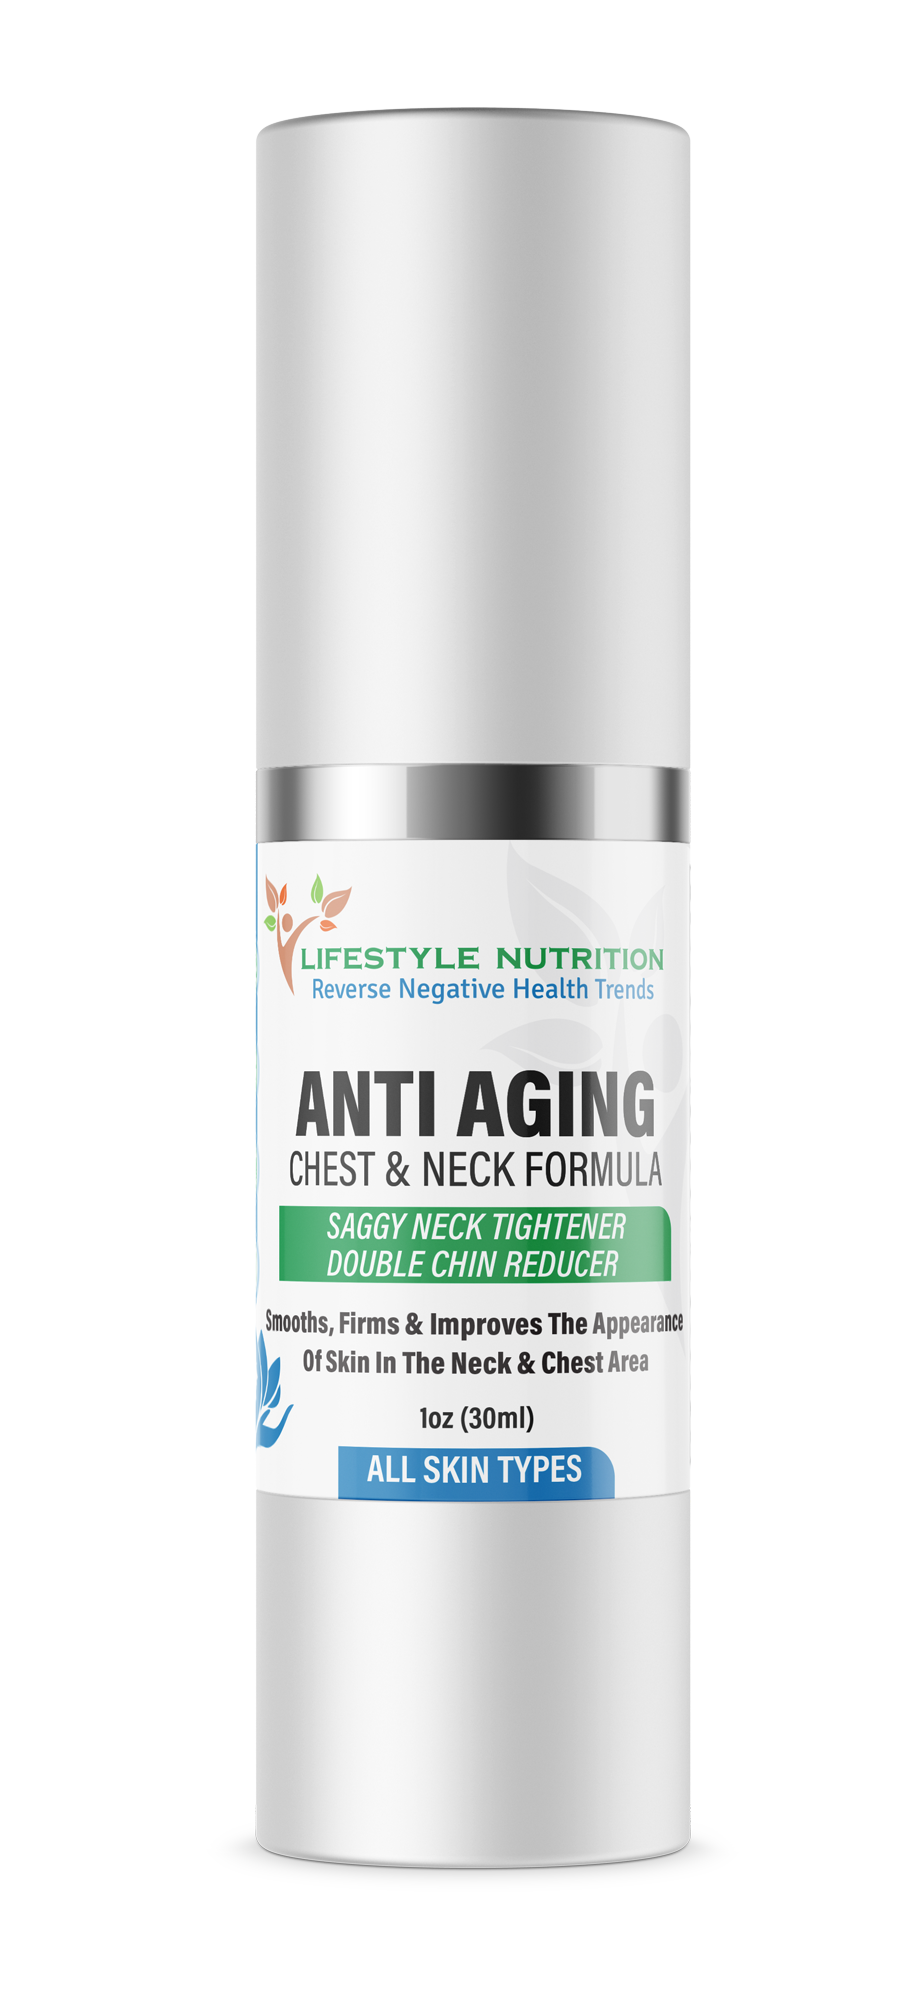 ANTI-AGING CHEST & NECK FORMULA (3-Pack)